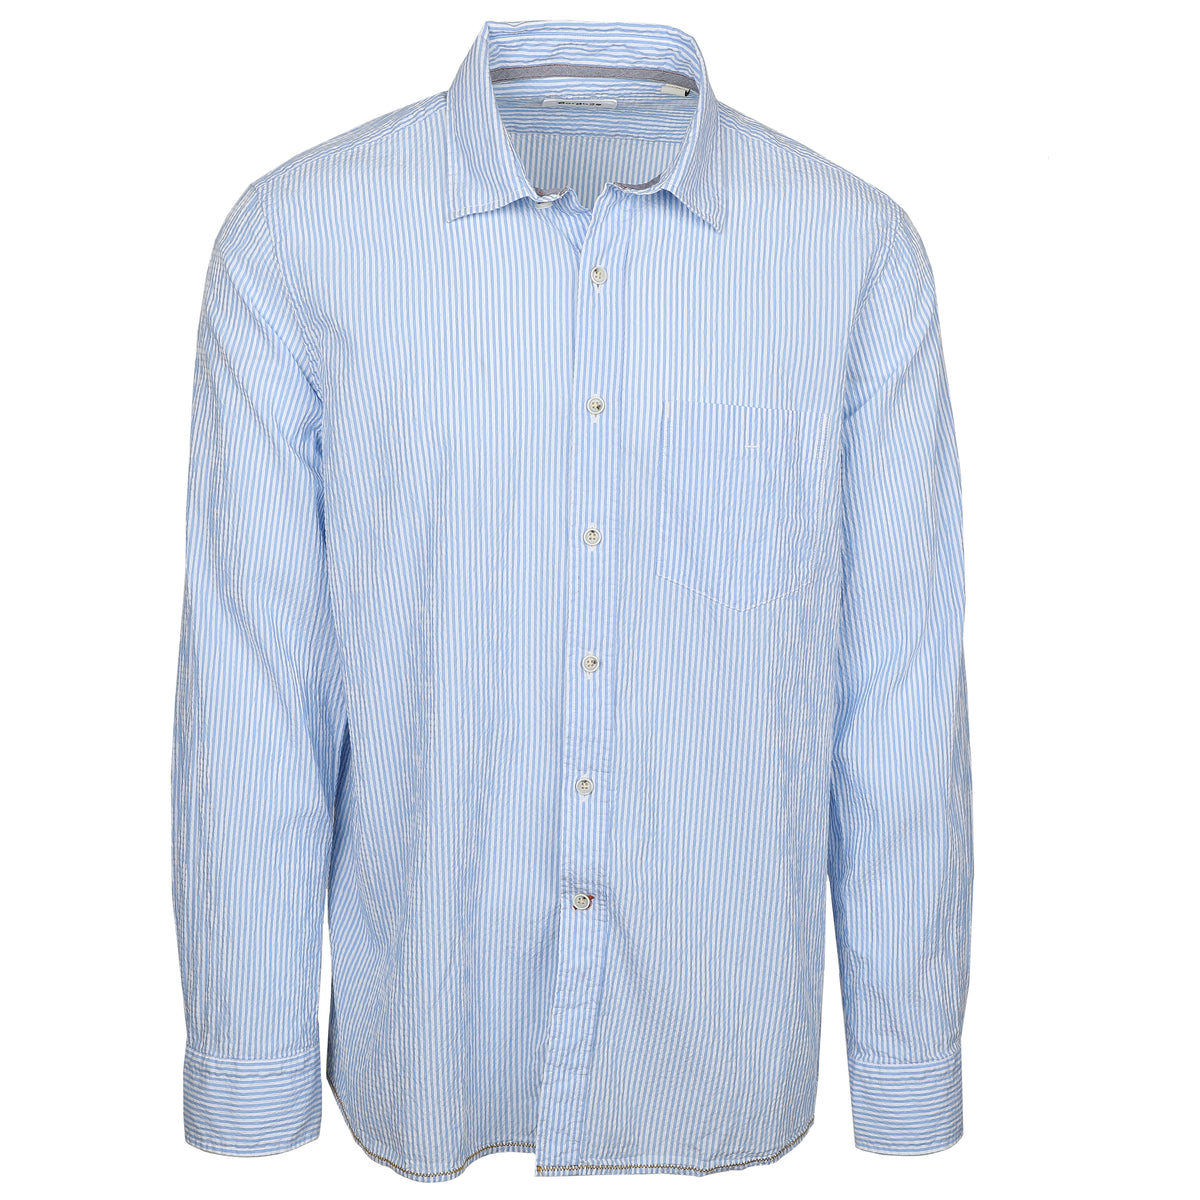 Look oh-so-cool and stay feeling hot with this Maratea Blue Seersucker Garment Dyed Long Sleeve Shirt. Crafted from lightweight seersucker fabric that&#39;s craft fully dyed for a unique look, you&#39;ll be ready for warm weather, whatever the season. Pucker up for a style that&#39;ll have onlookers in awe.  100% Cotton • Long Sleeve • Spread Collar • Button Cuff • No Chest Pocket • Machine Wash • Made in Italy 